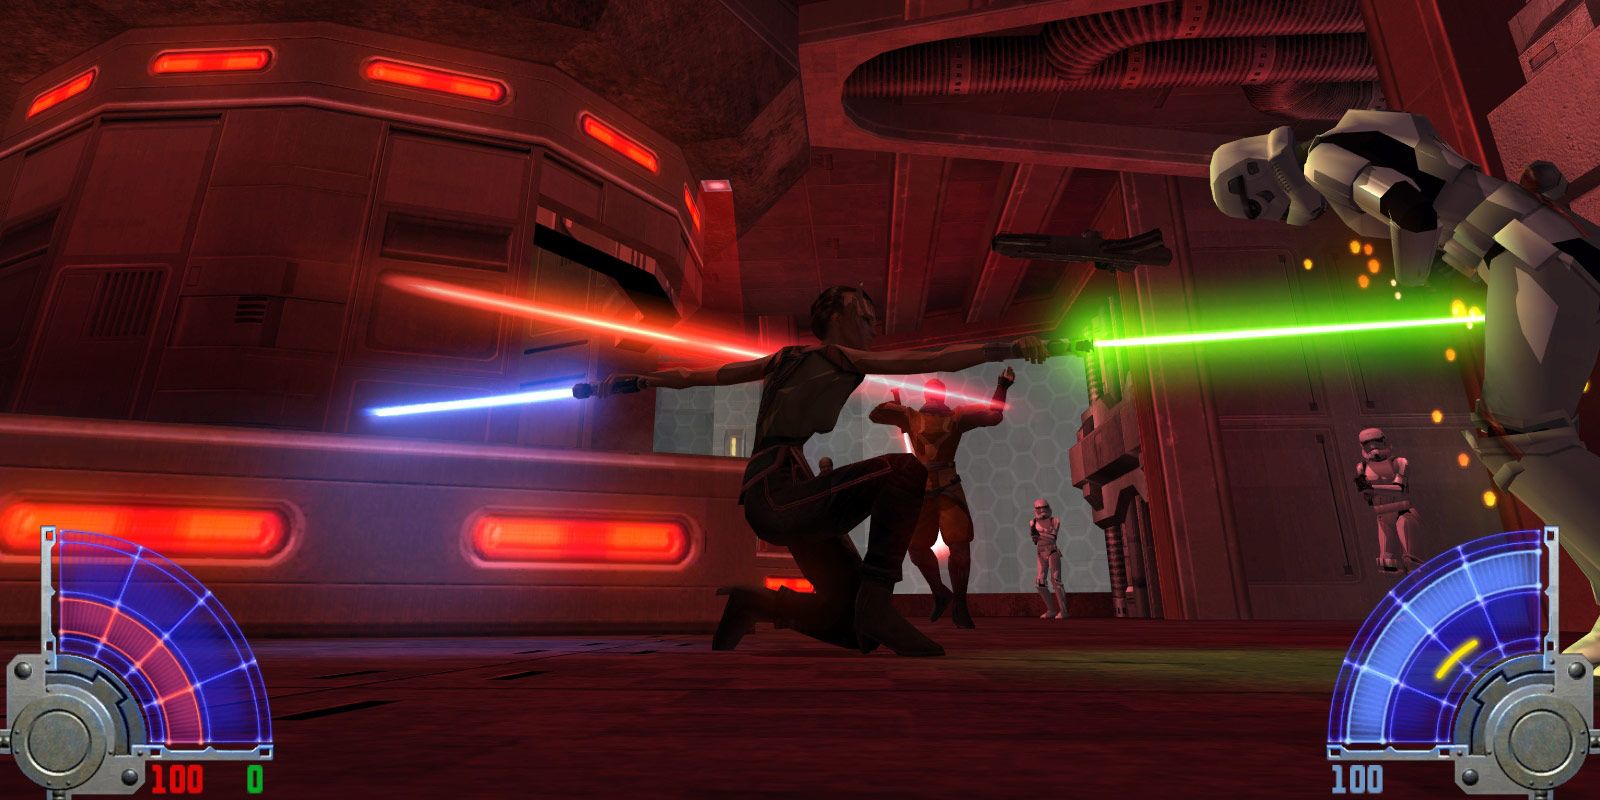 Star Wars Jedi Academy player wielding one lightsaber in each hand to take out enemy stormtroopers.